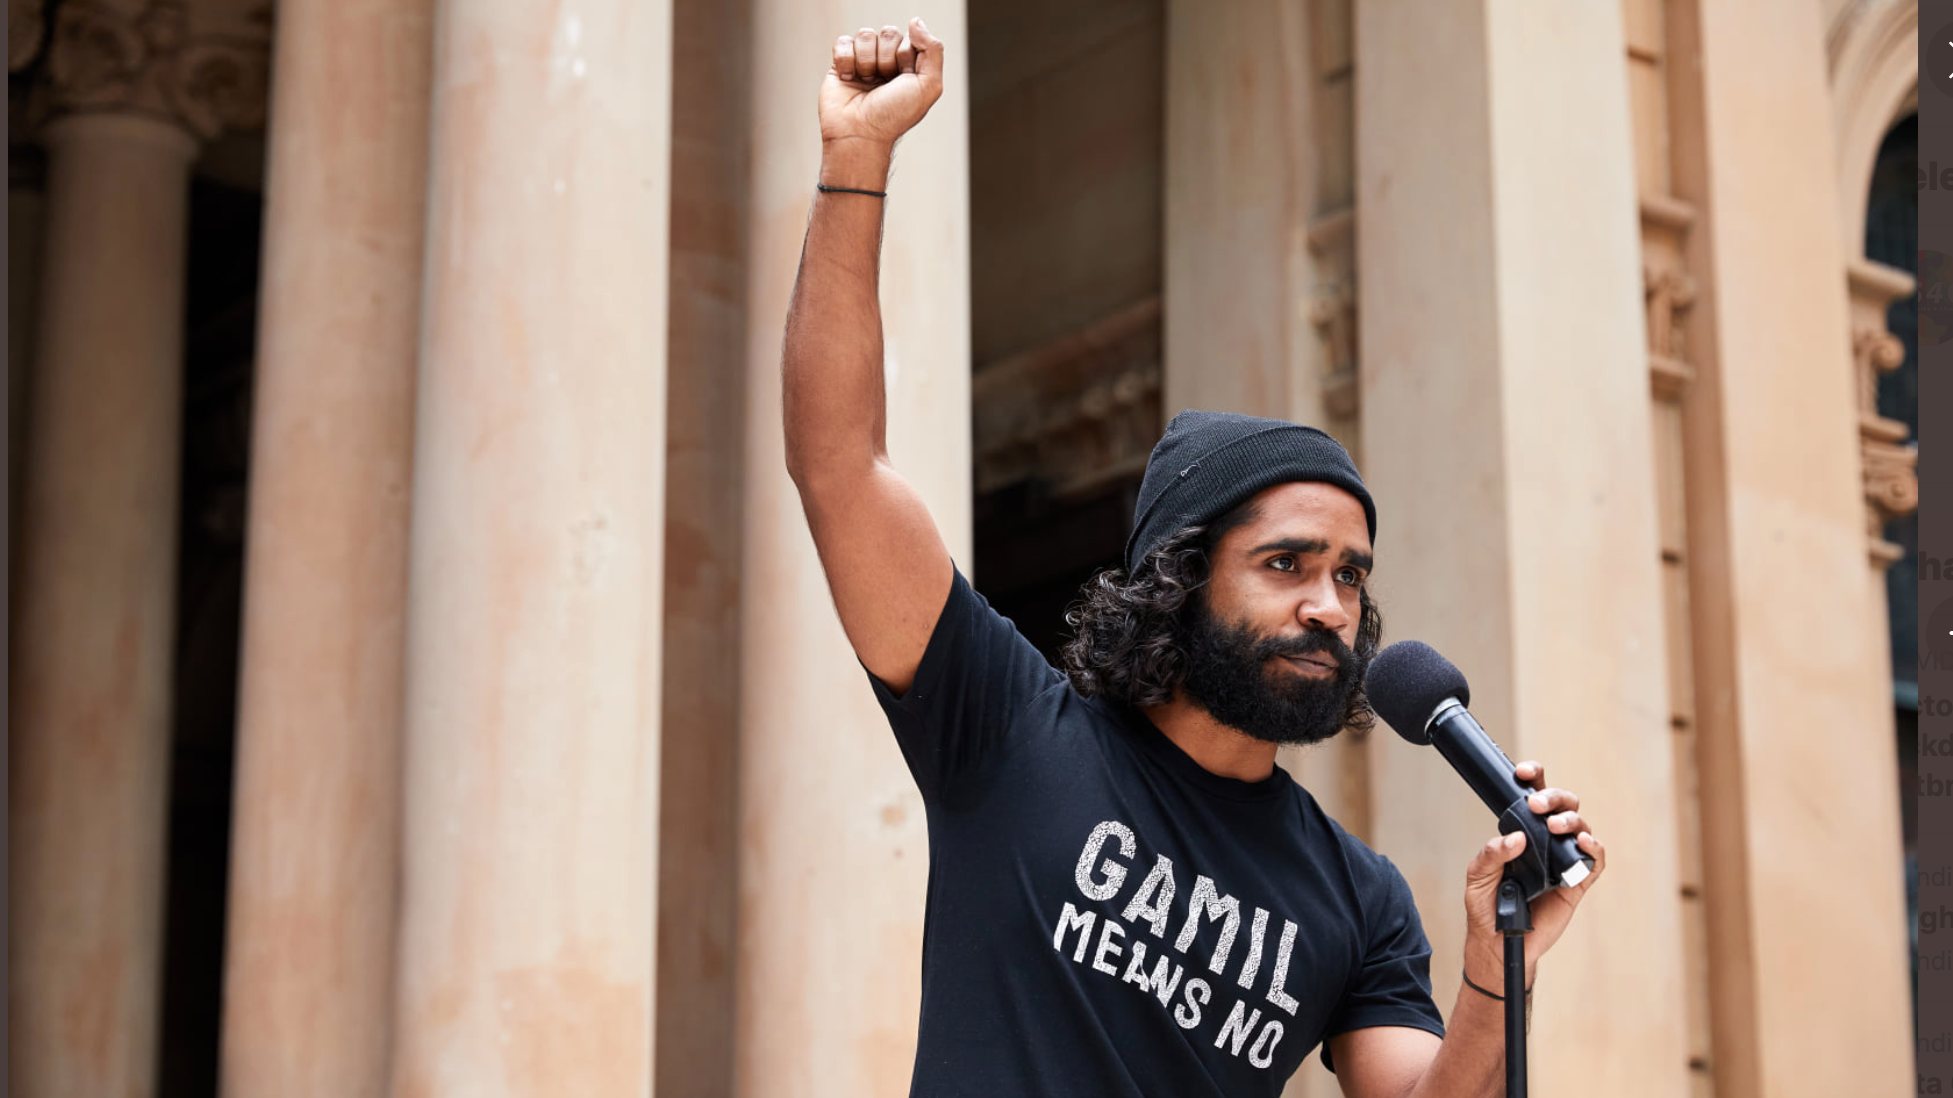 Upper torso & headshot of rally speaker Gamilaraay activist Ian Brown wearing a black t-shirt that says “Gamil means No” and holding microphone while raising fist defiantly. His facial features are serious, sad and grim. The background framing (soft focus) is a section of tall concrete columns and archways at the front of the Sydney town hall.